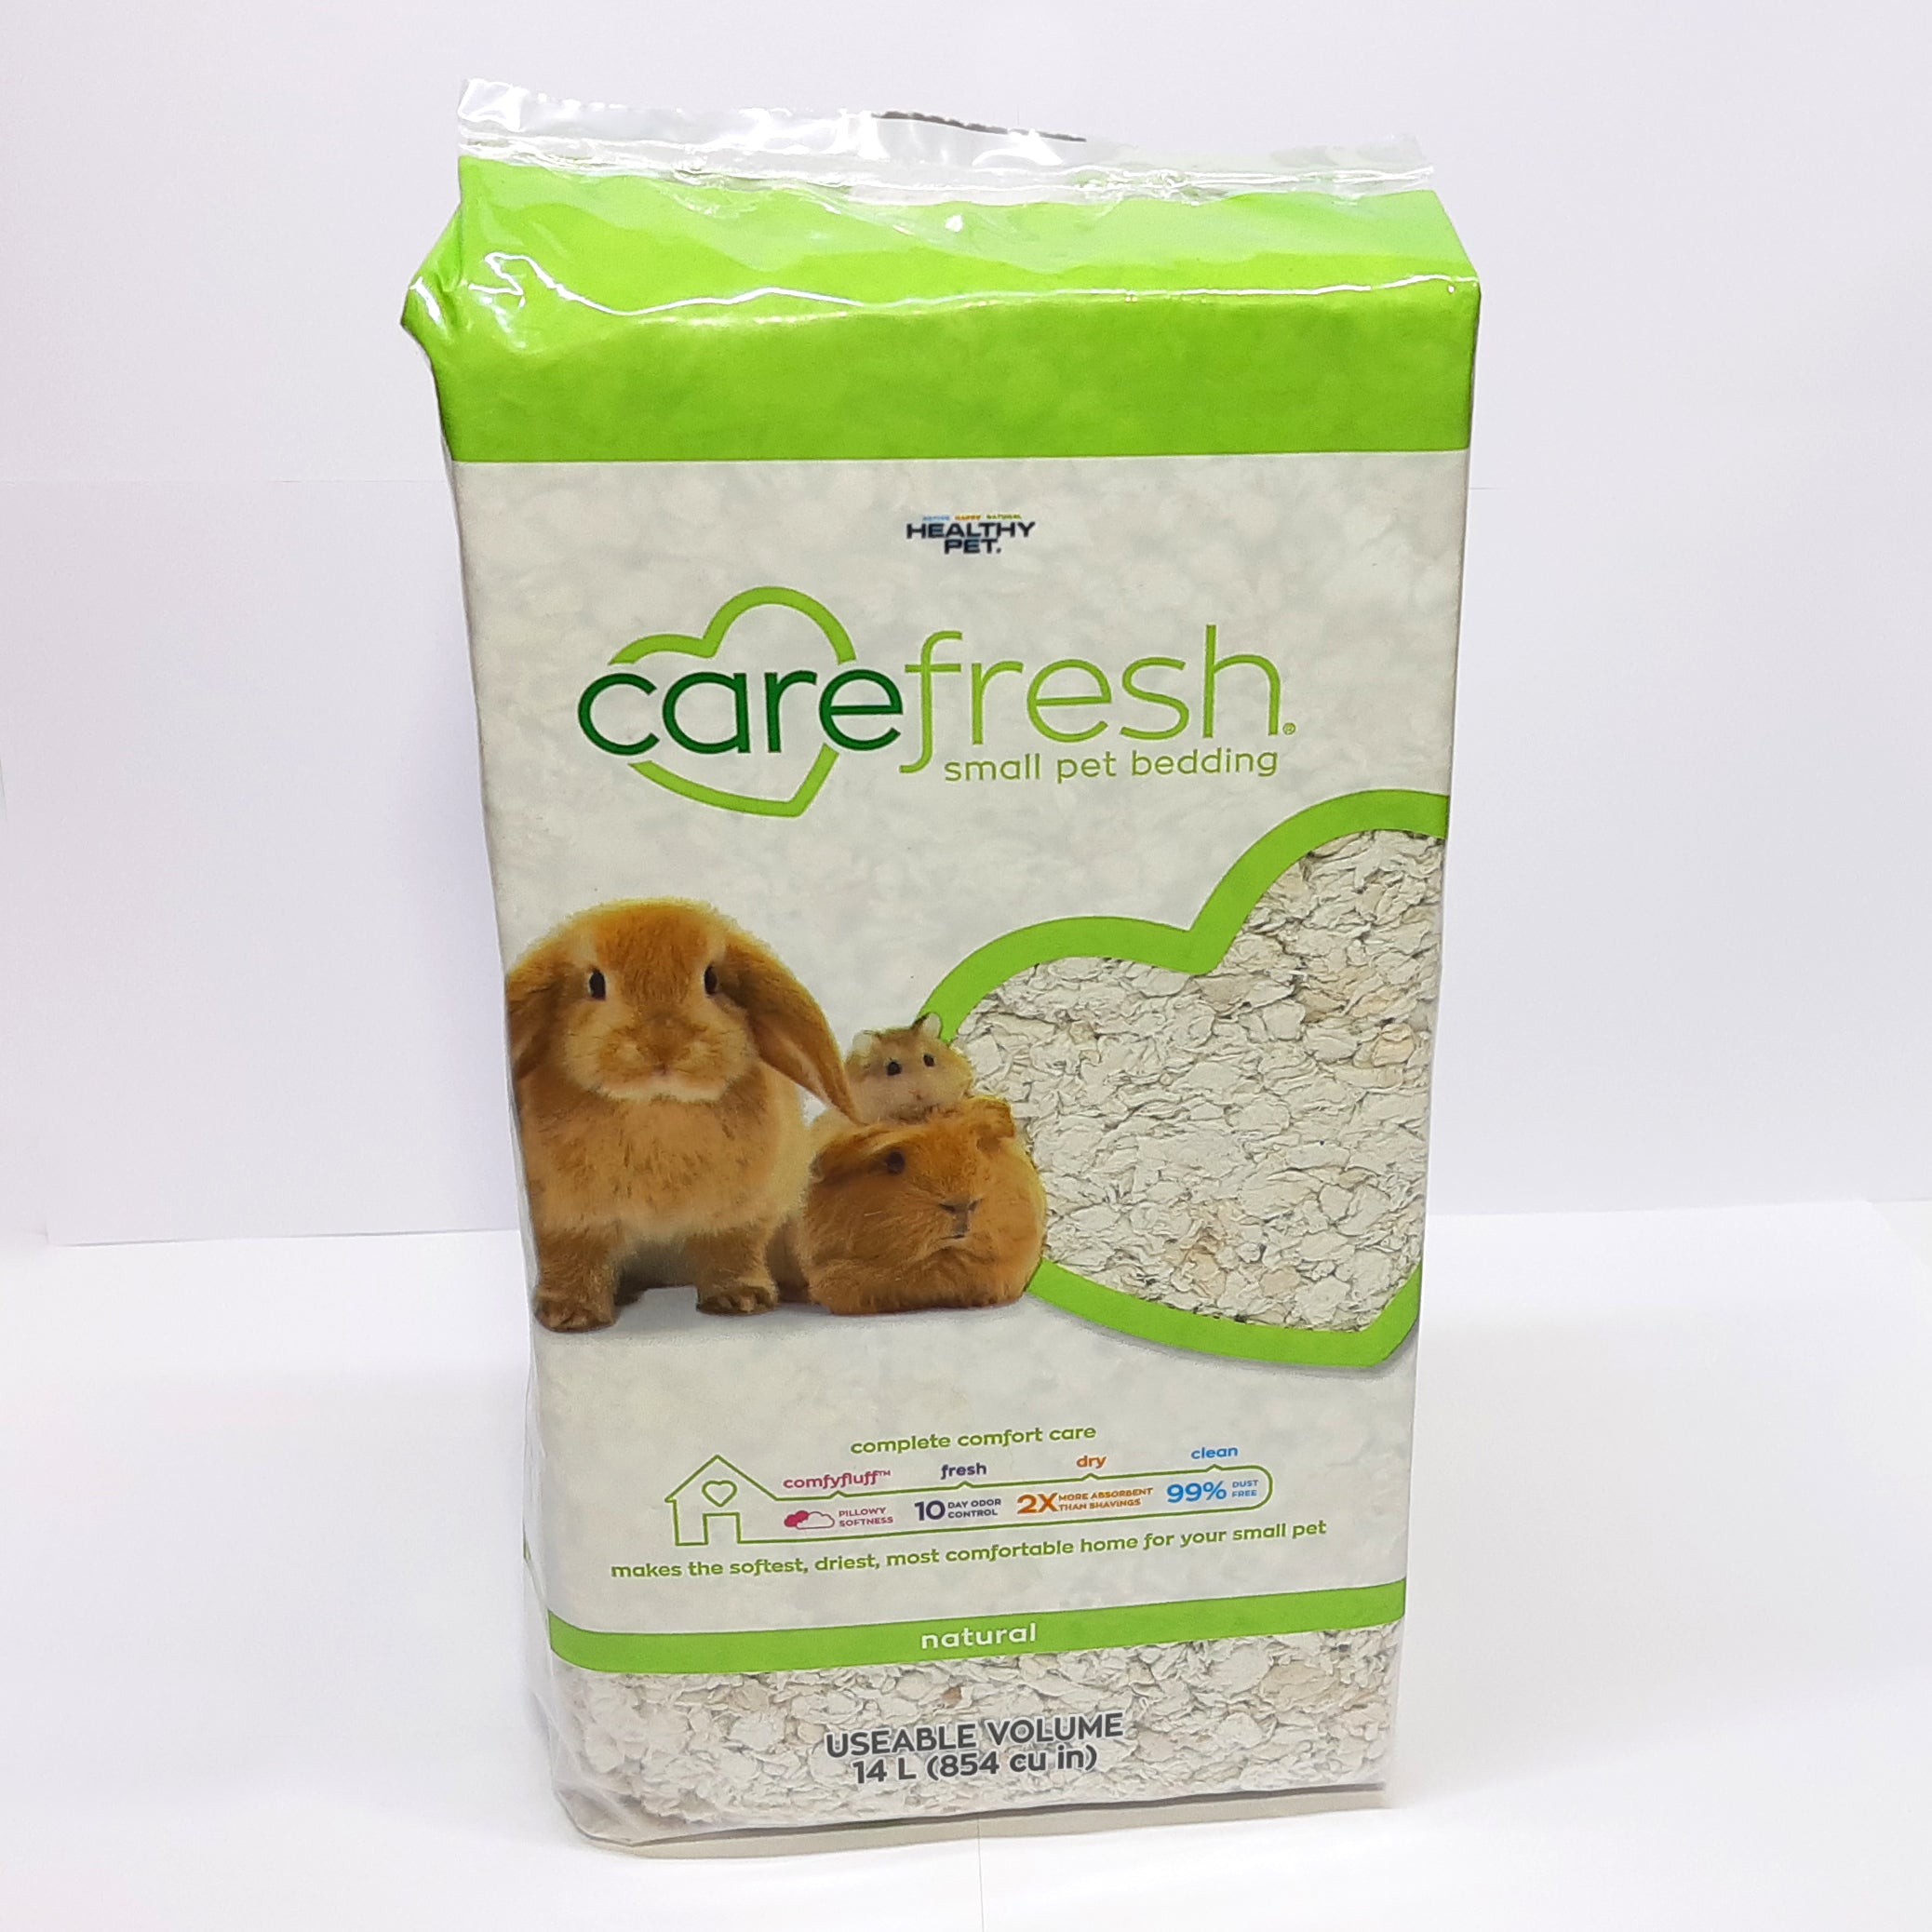 Carefresh Natural Substrate 14 Lt (730 grs)